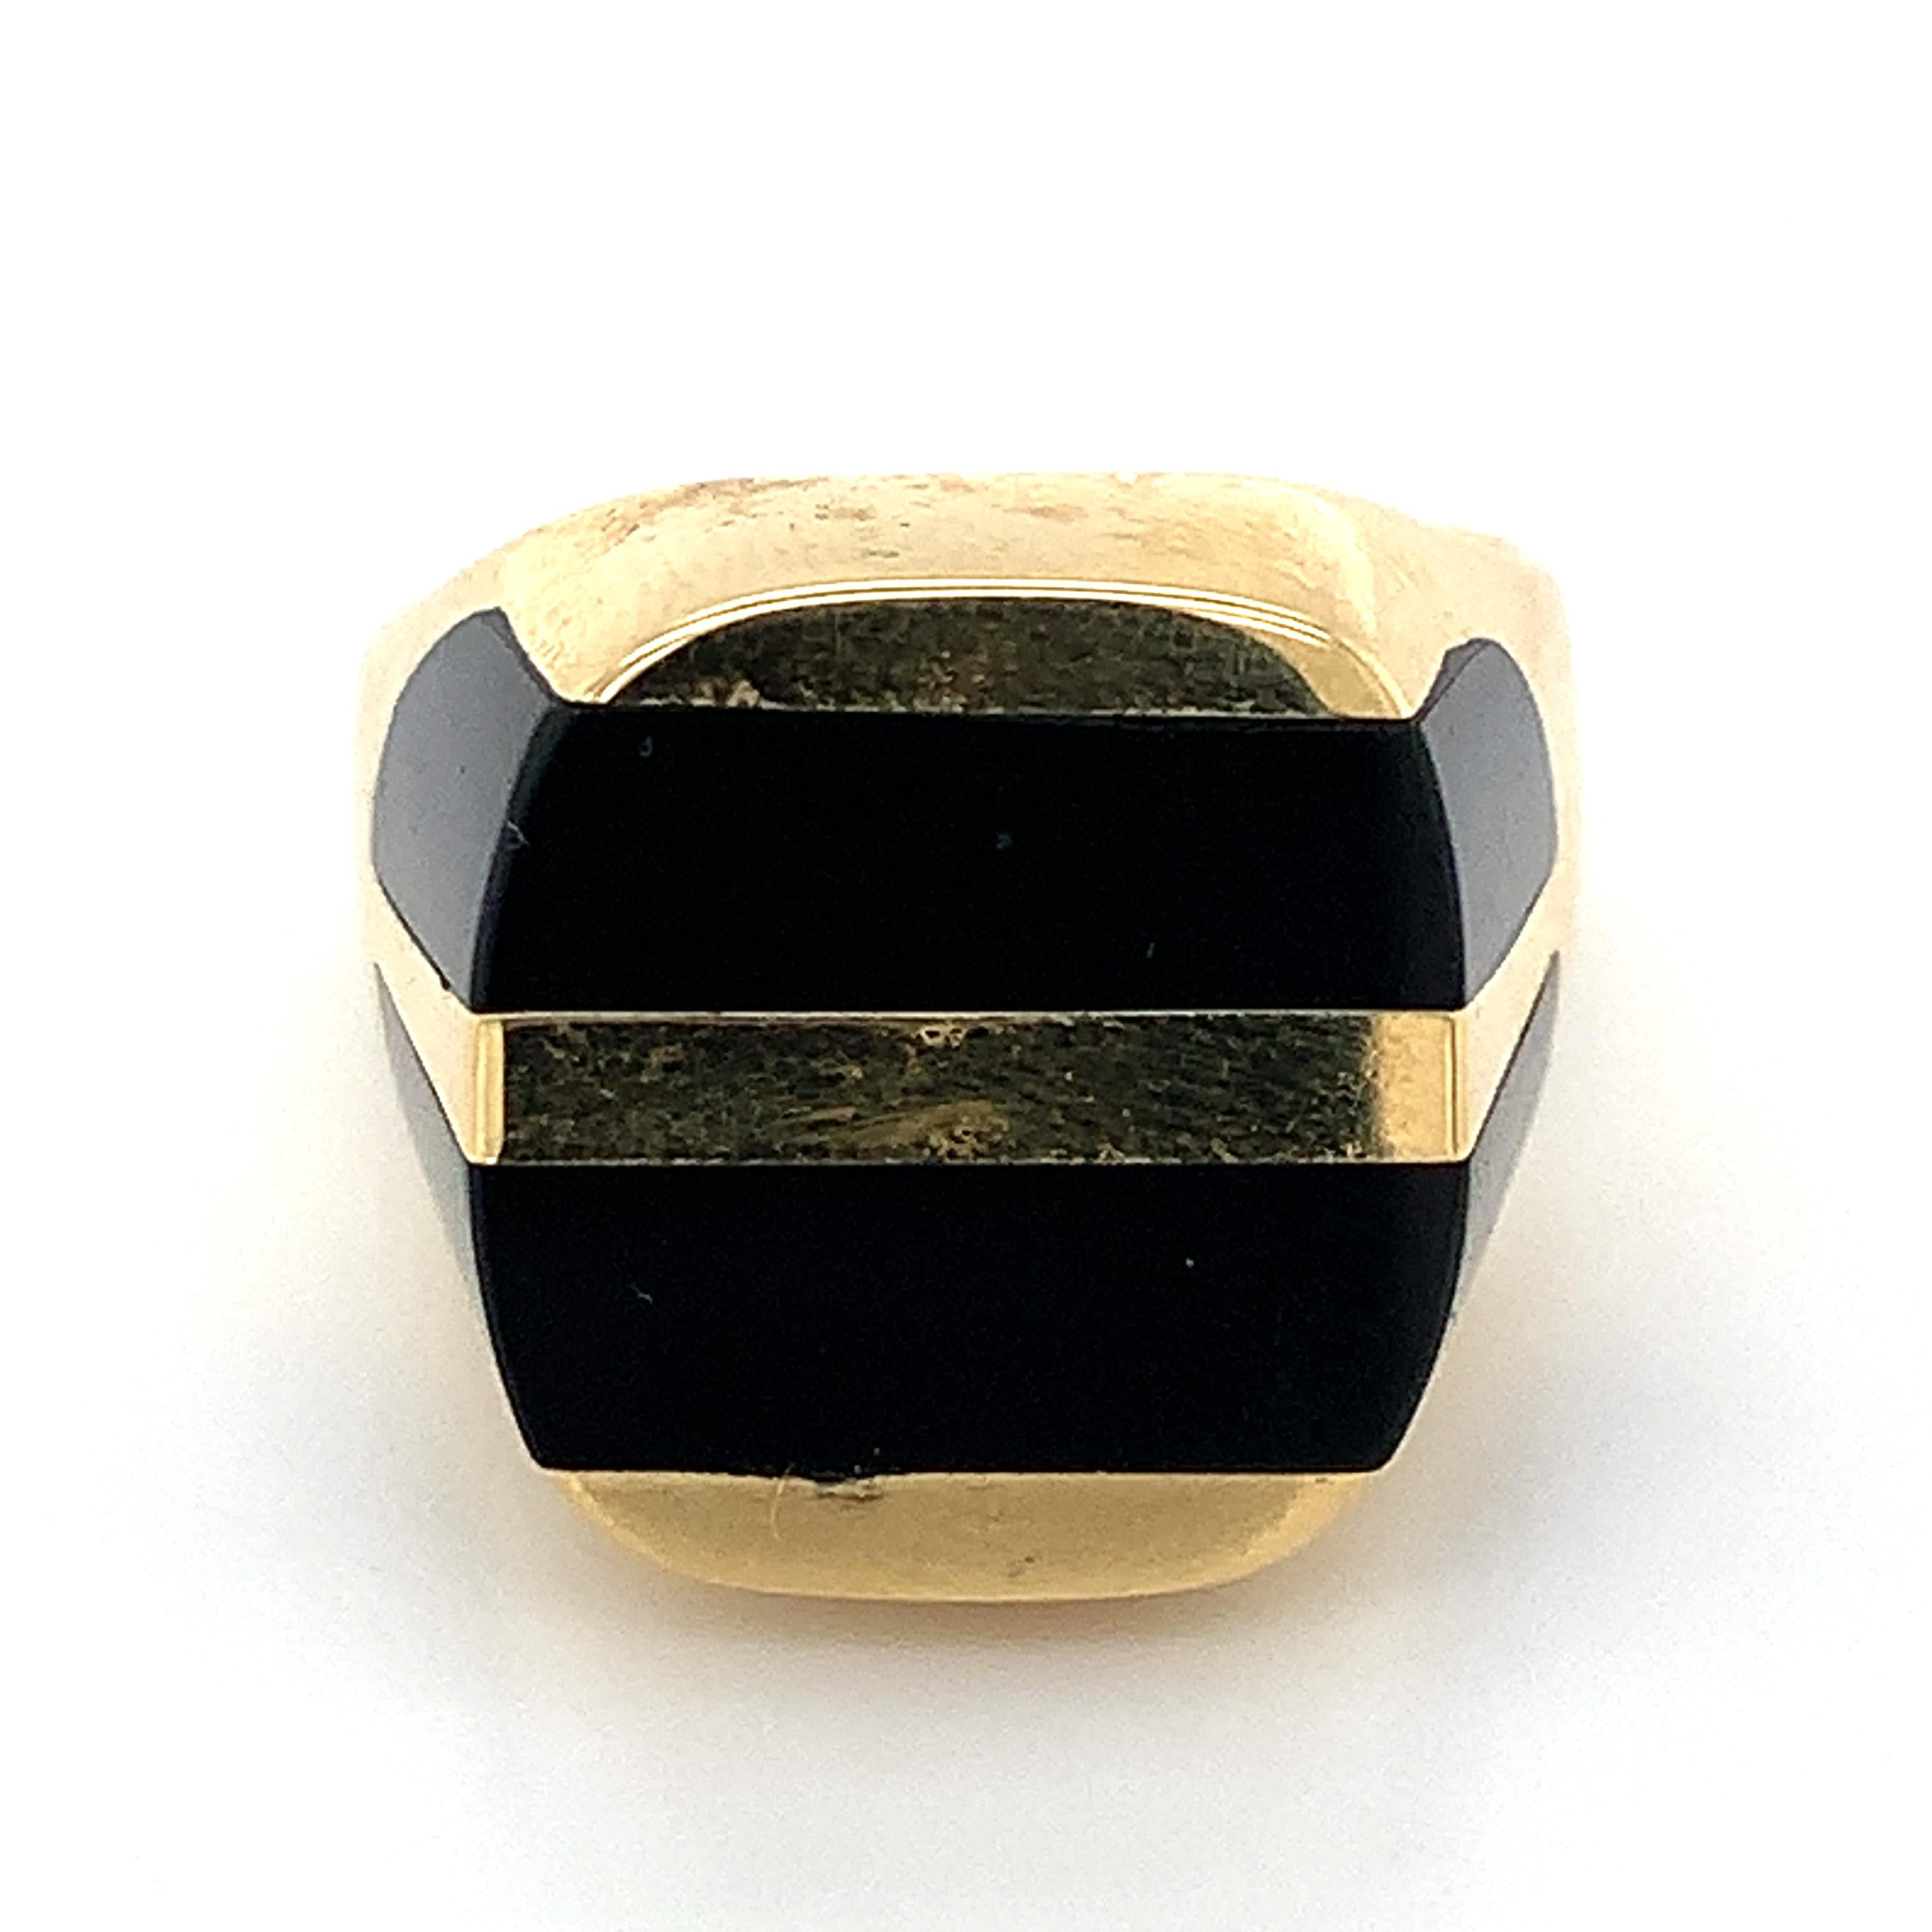 Men's 18k Yellow Gold Onyx Ring
10.4 Grams 
Size 7.25
15.25mm Wide
